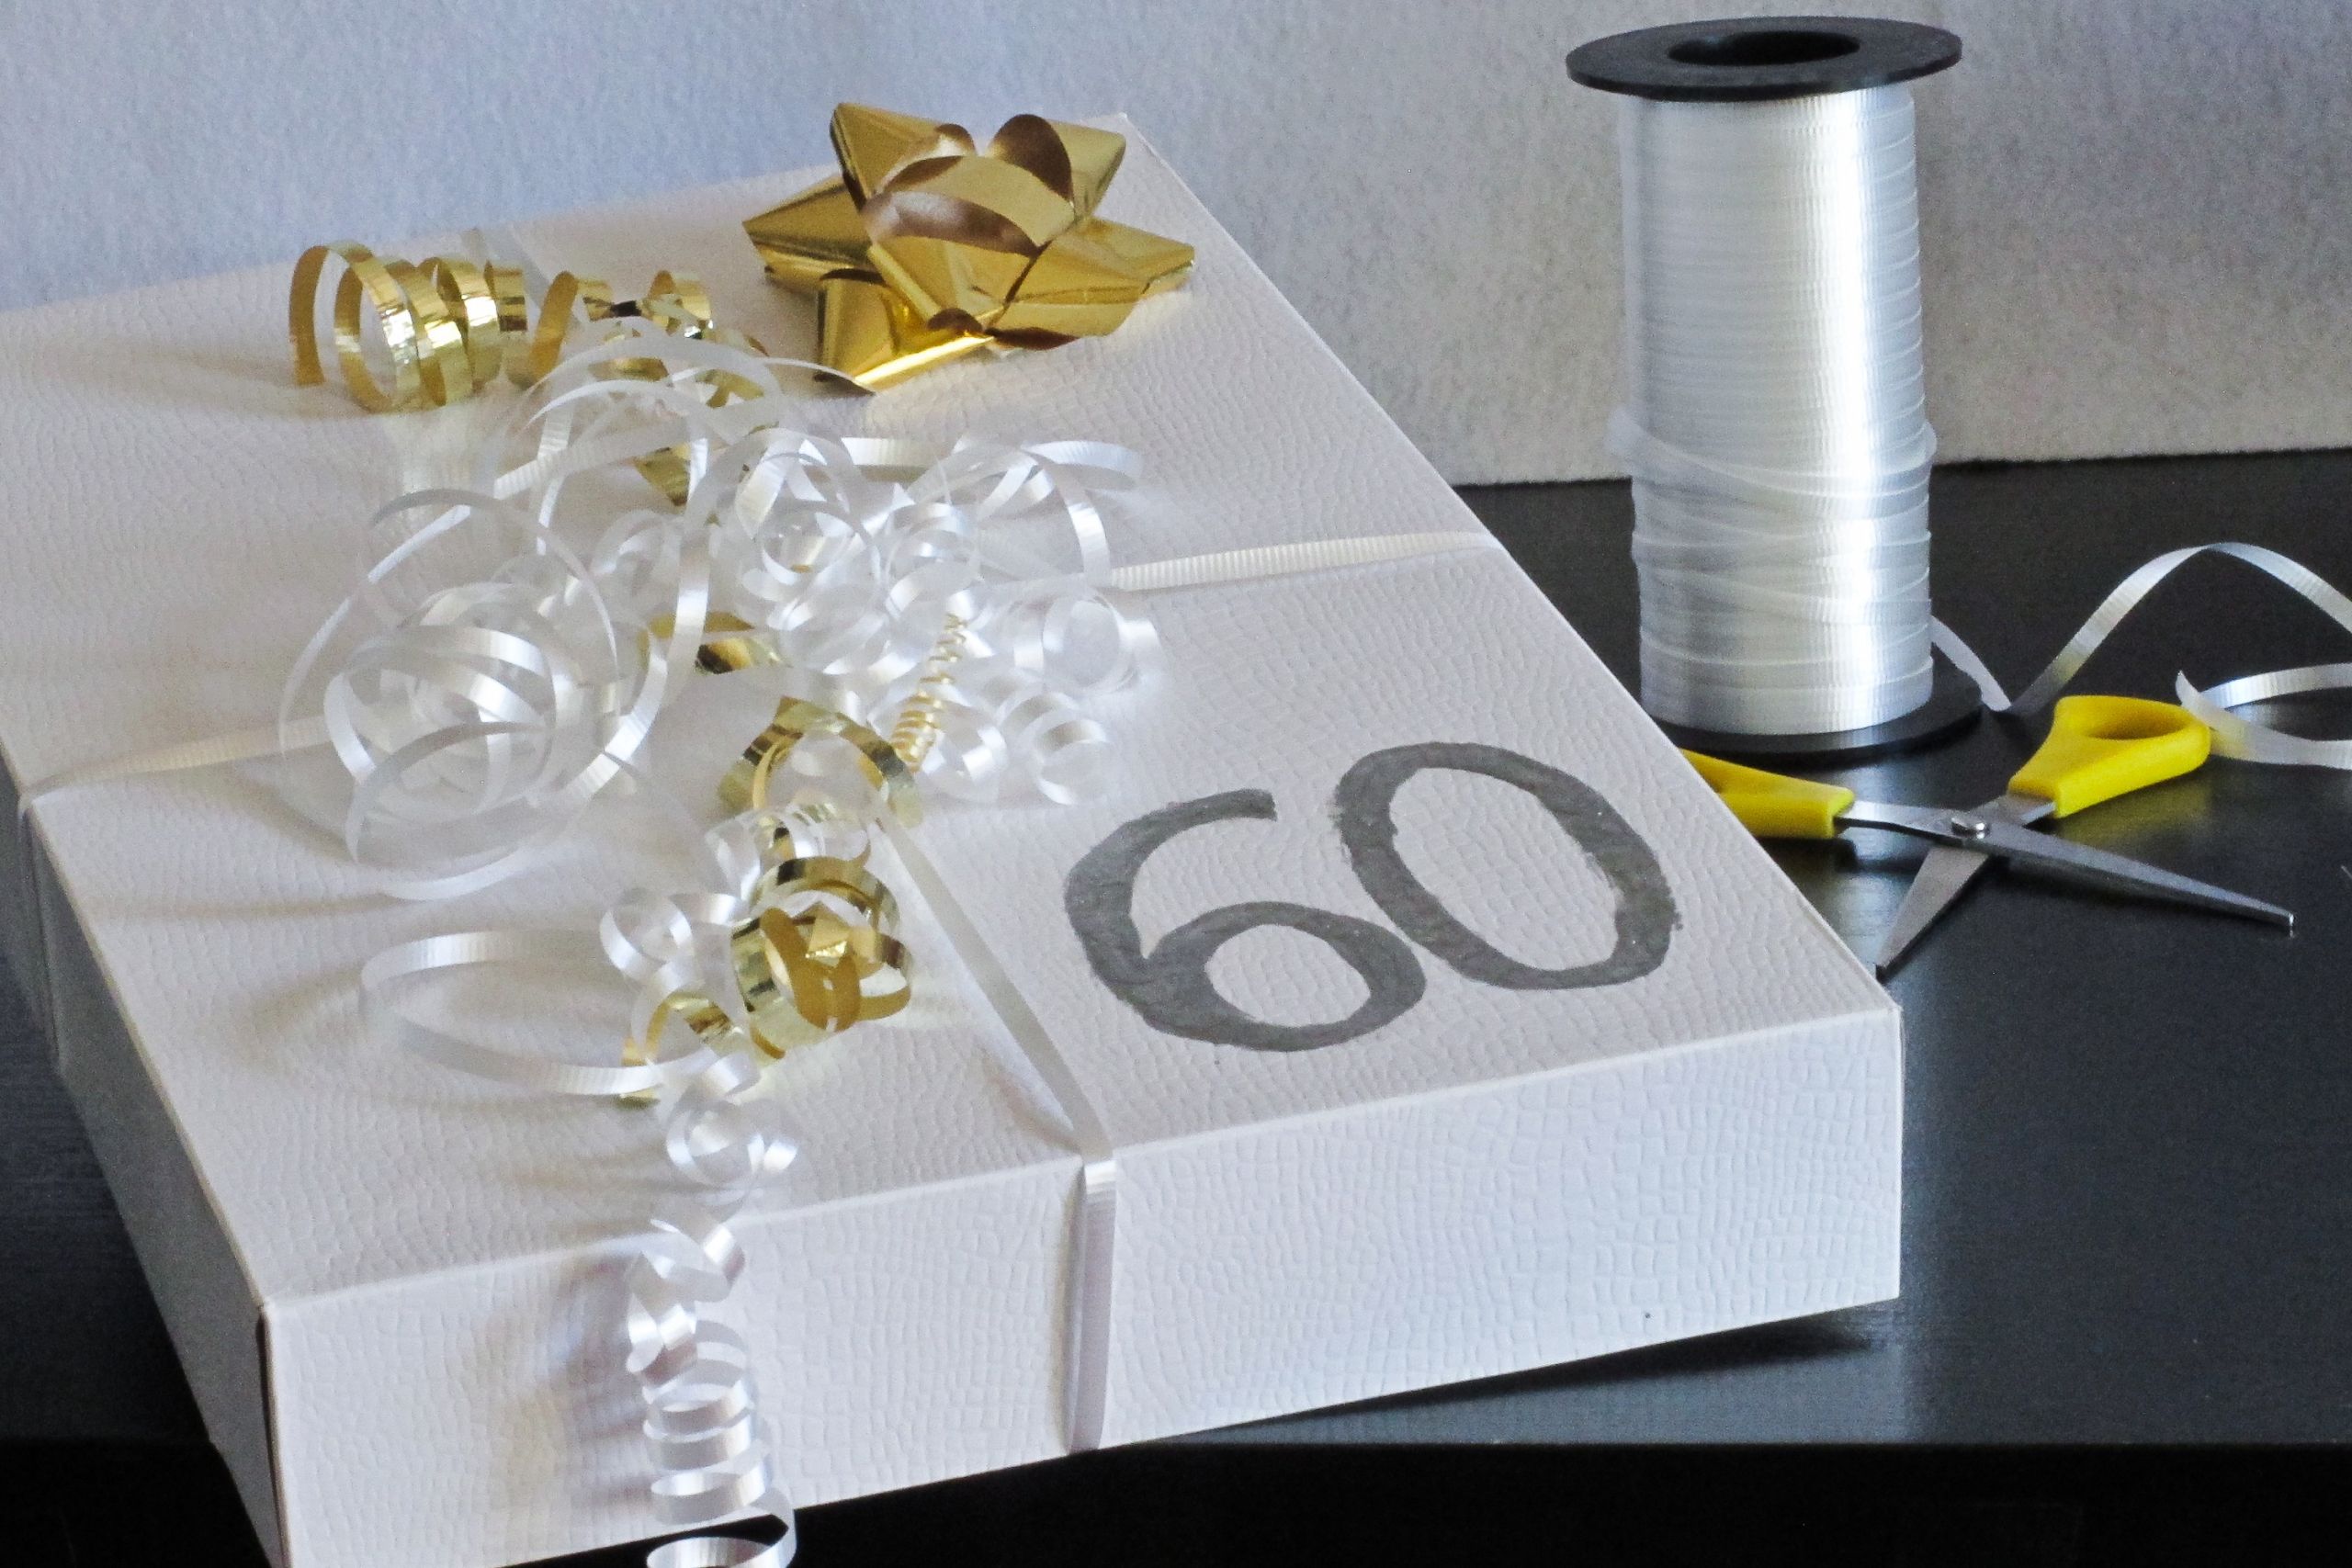 60 Wedding Anniversary Gift Ideas
 60th Wedding Anniversary Gifts for Parents